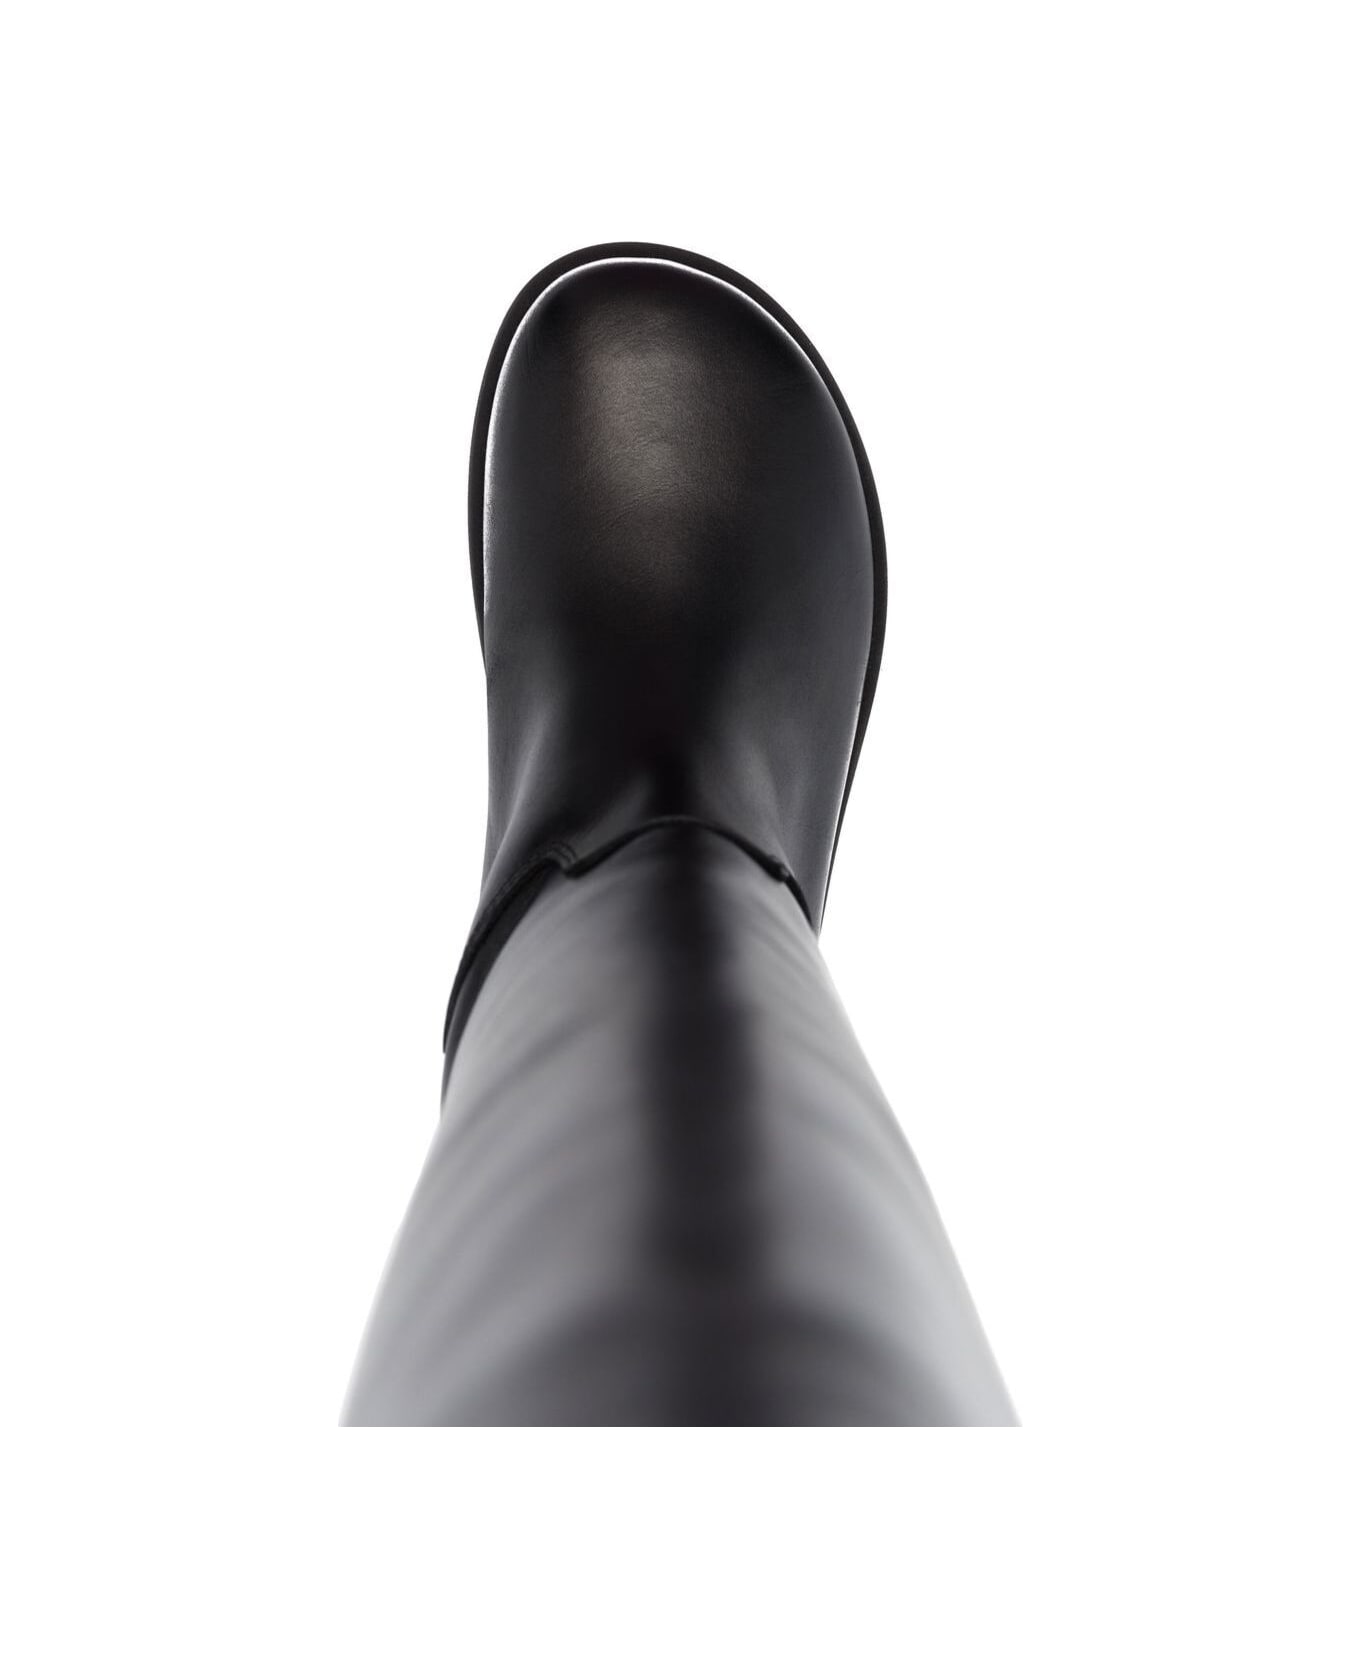 GIA BORGHINI Black Slip-on Boots With Platform In Smooth Leather Woman - Black ブーツ